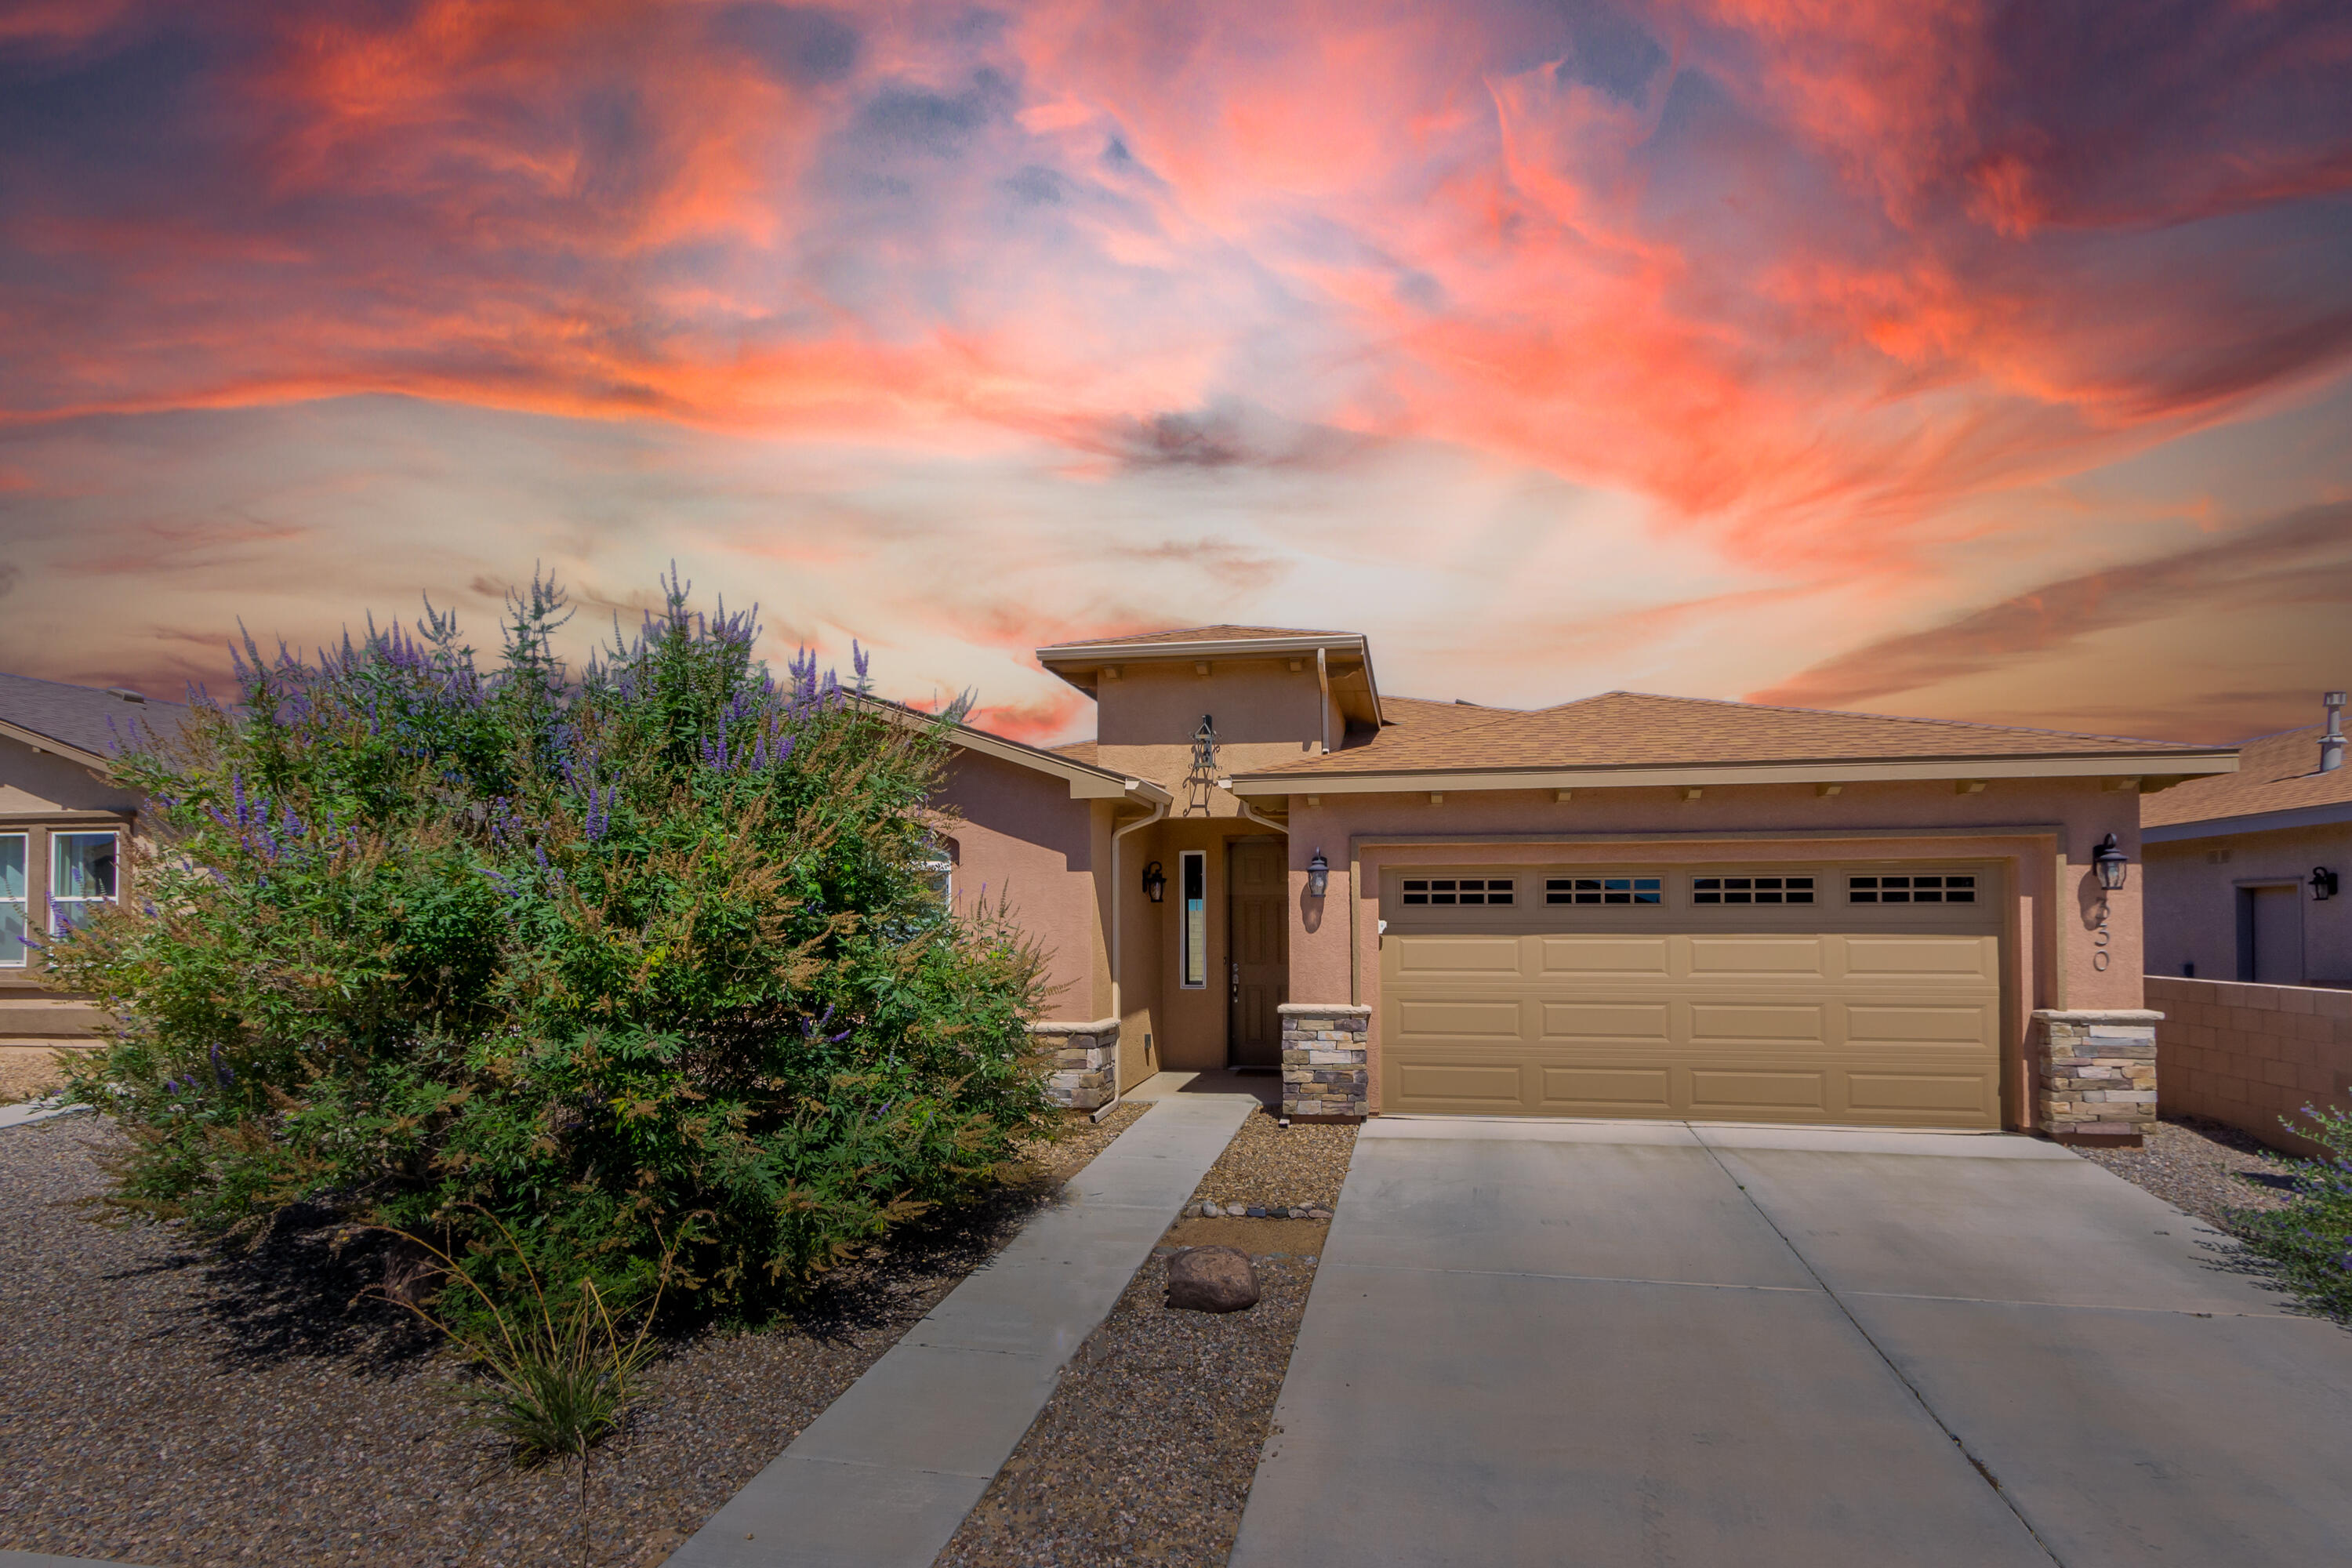 You can't beat the electric bills (less than $10/mo for this seller) for this beautiful home in Jubilee...the award-winning 55+ community! This is an expanded/customized Jemez plan like brand new only better: fully landscaped & window coverings make it move-in ready. Wonderful upgrades: stacked stone on the exterior for great curb appeal; pendant lights at high bar between kitchen & dining; expanded office/den provide great hobby/work space; ceiling fans; Solaro attic fan improves heating/cooling efficiency; addt'l upgraded maple cabs in kichen (huge pantry cabs w/roll-outs), laundry & media center in great room; 18x18 tile throughout entire home w/custom backsplash & shower surrounds in both baths; SS appliances. Expanded larger patio. Don't miss this GREAT opportunity!!